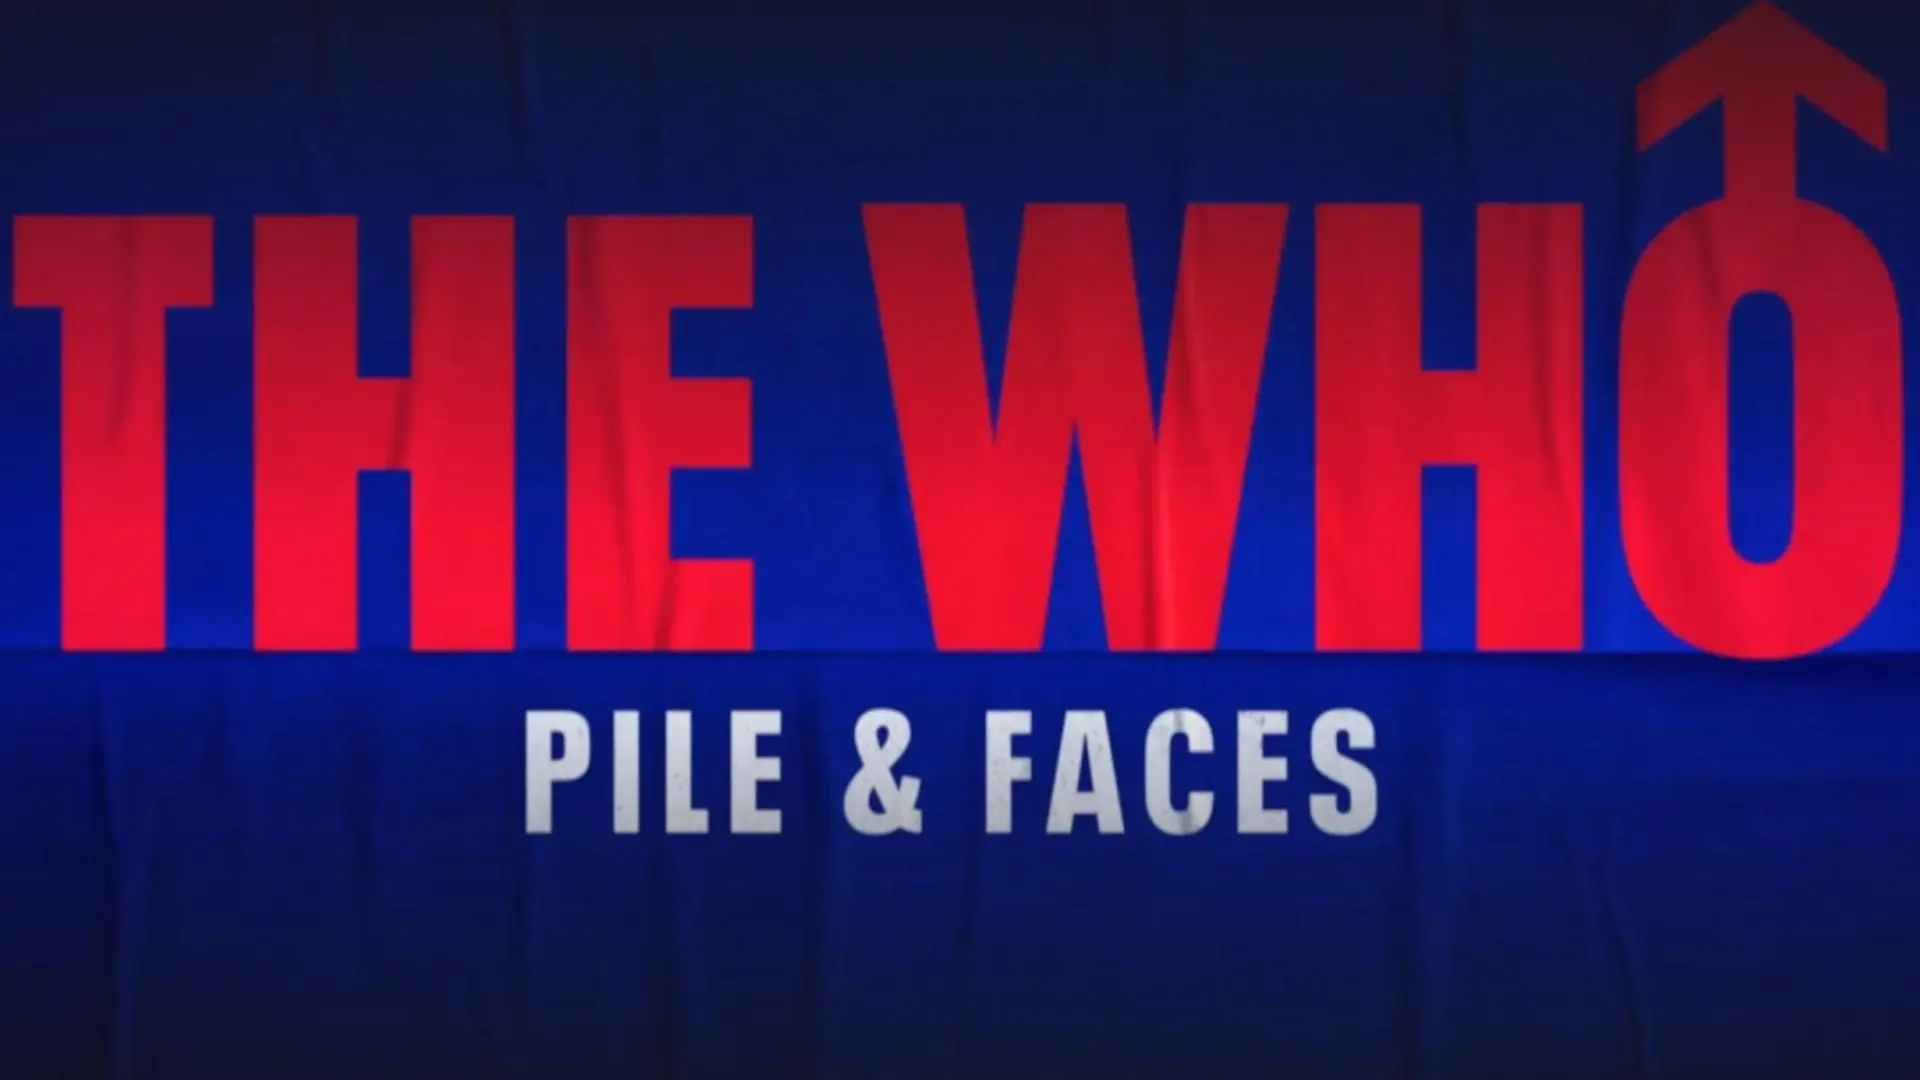 The Who: One Band's Explosive Story_peliplat